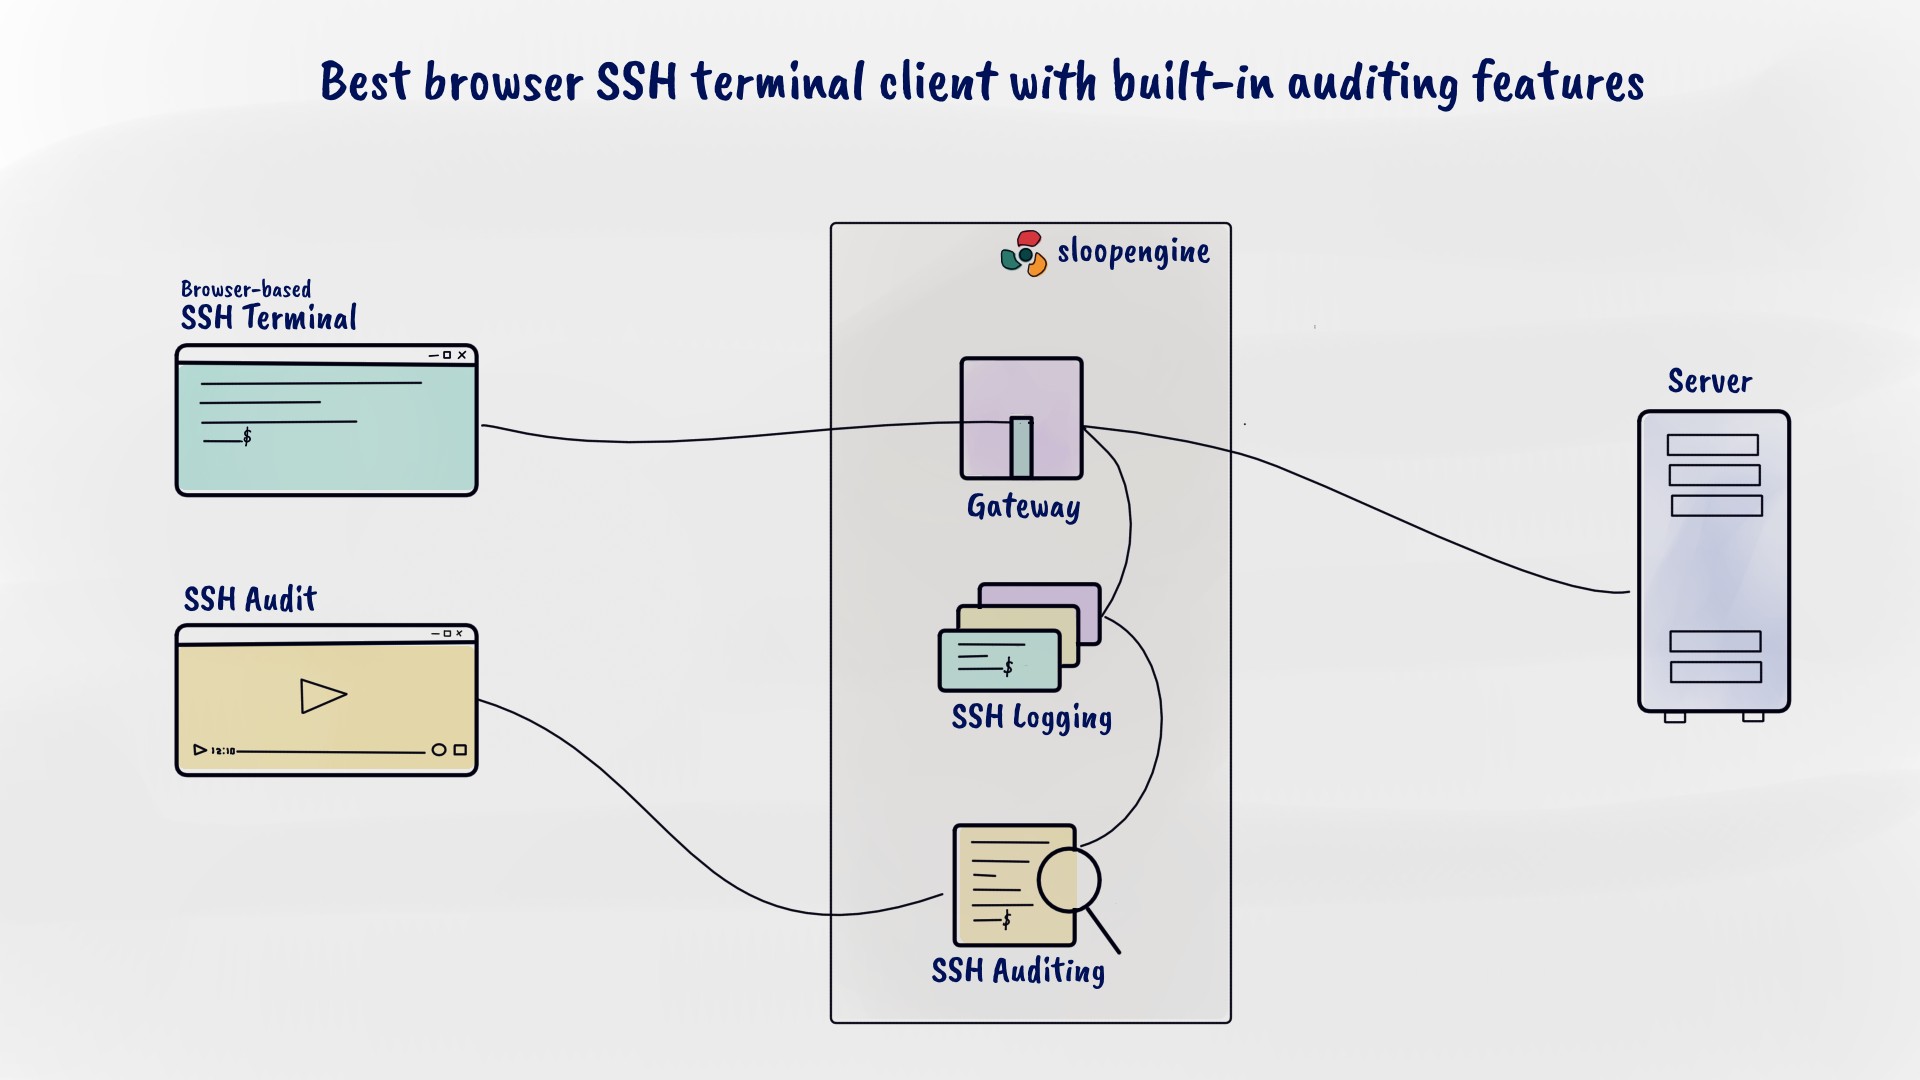 The image illustrates how SloopEngine's browser-based SSH Terminal and SSH audit works.